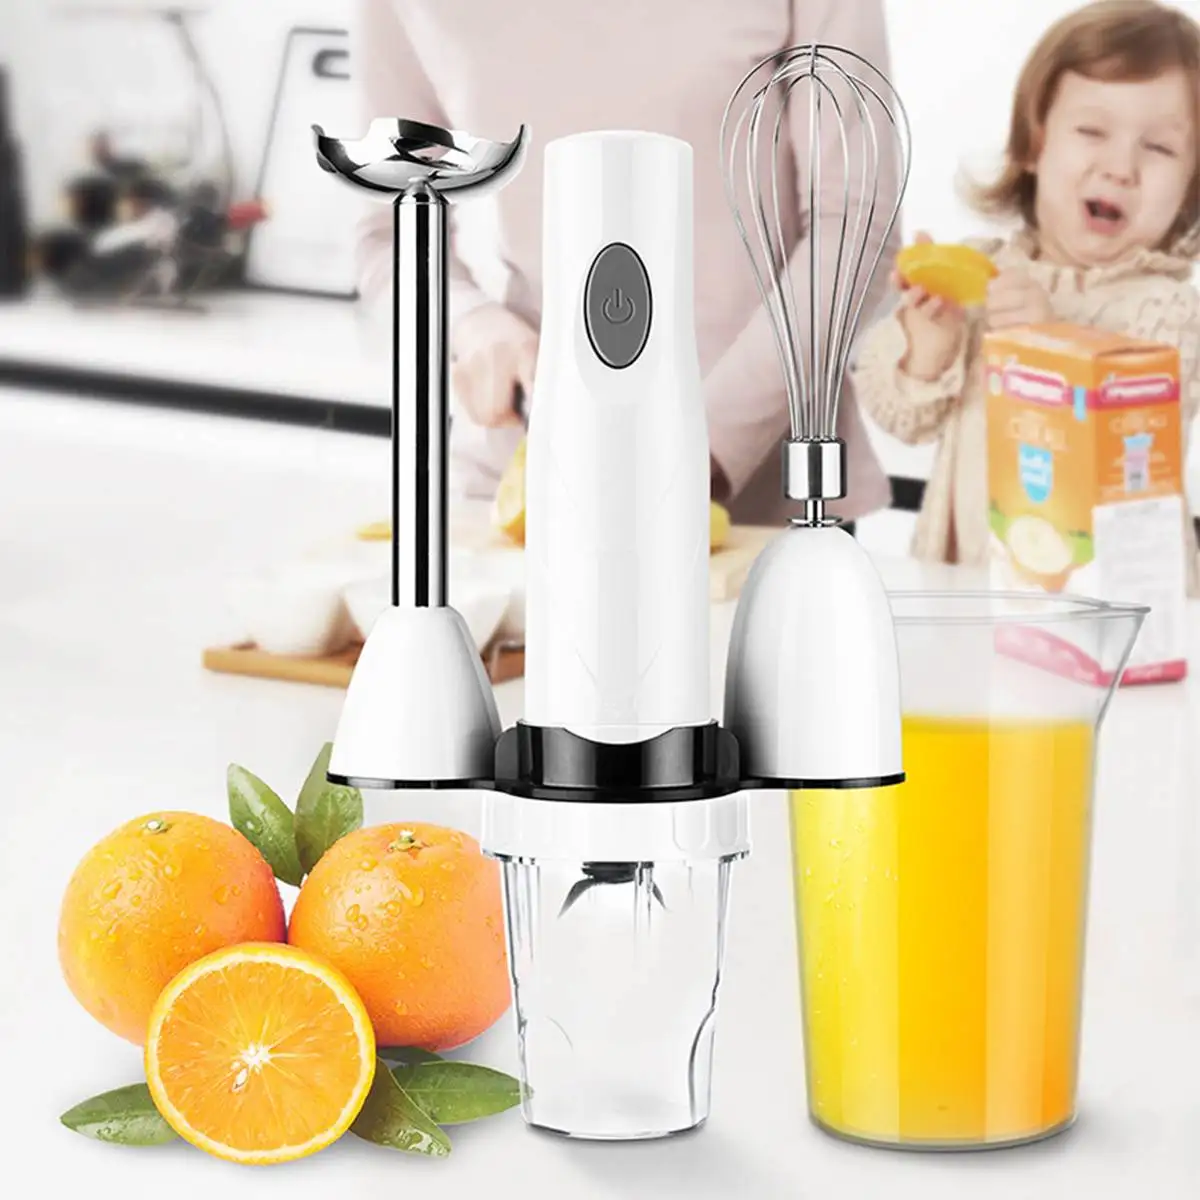 

2 Blades 4 in 1 Electric Food Blender Multifunctional Mixer household Detachable Stainless Steel hand-held stirring rod 220V